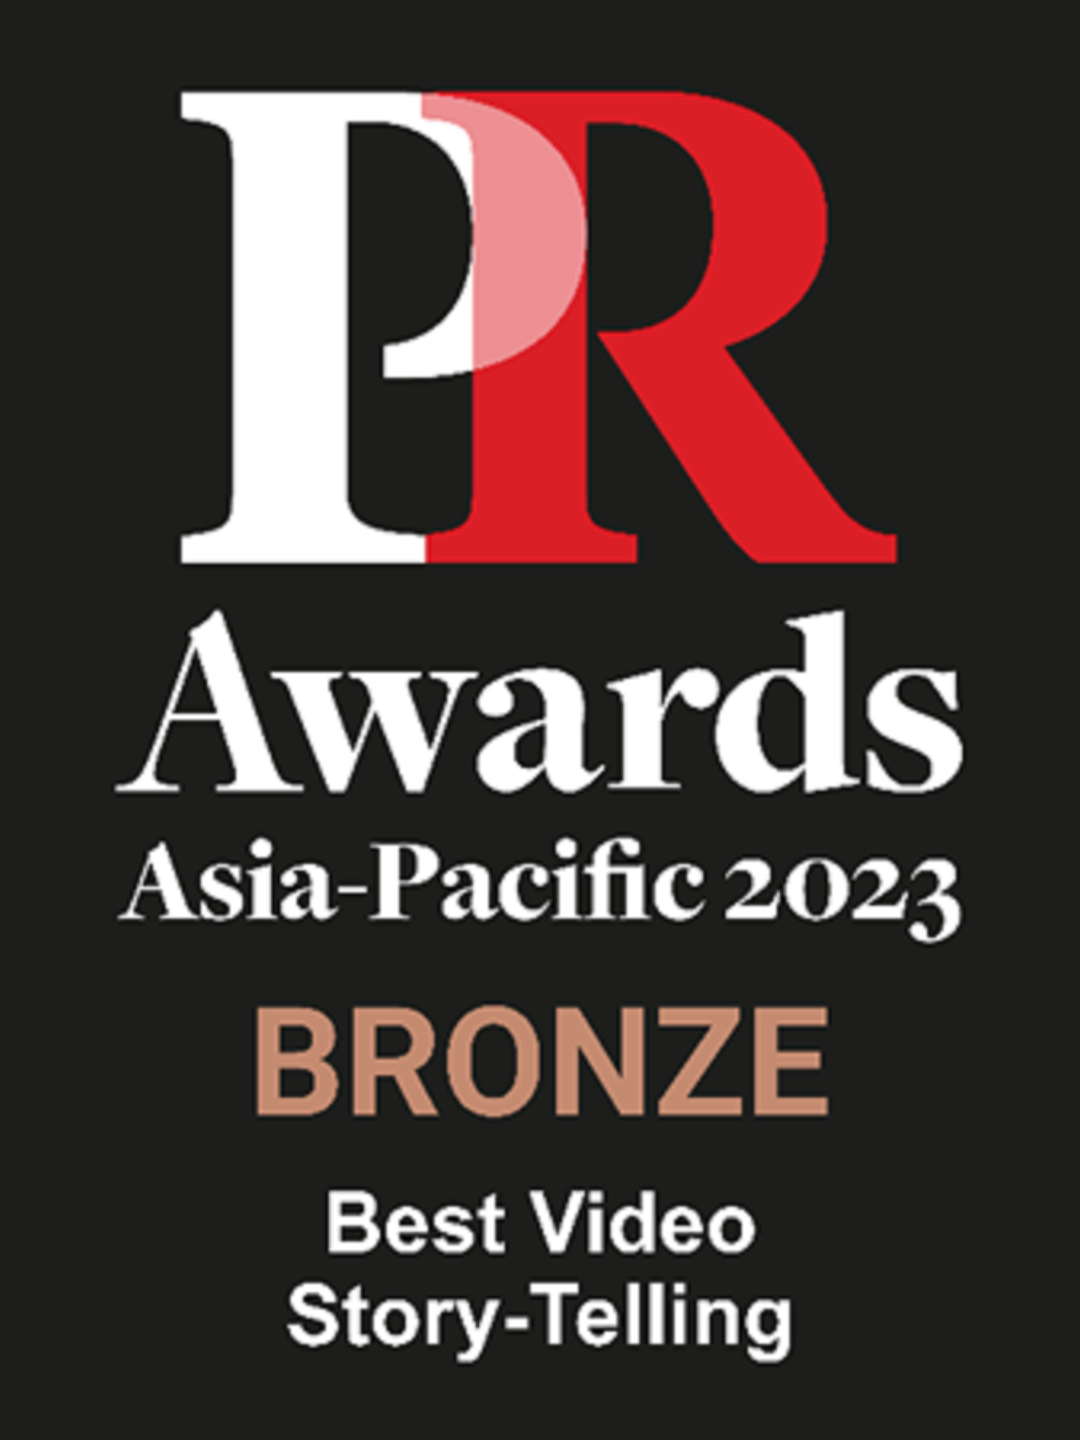 CCG Team claimed the Best Video Story-Telling Bronze Award